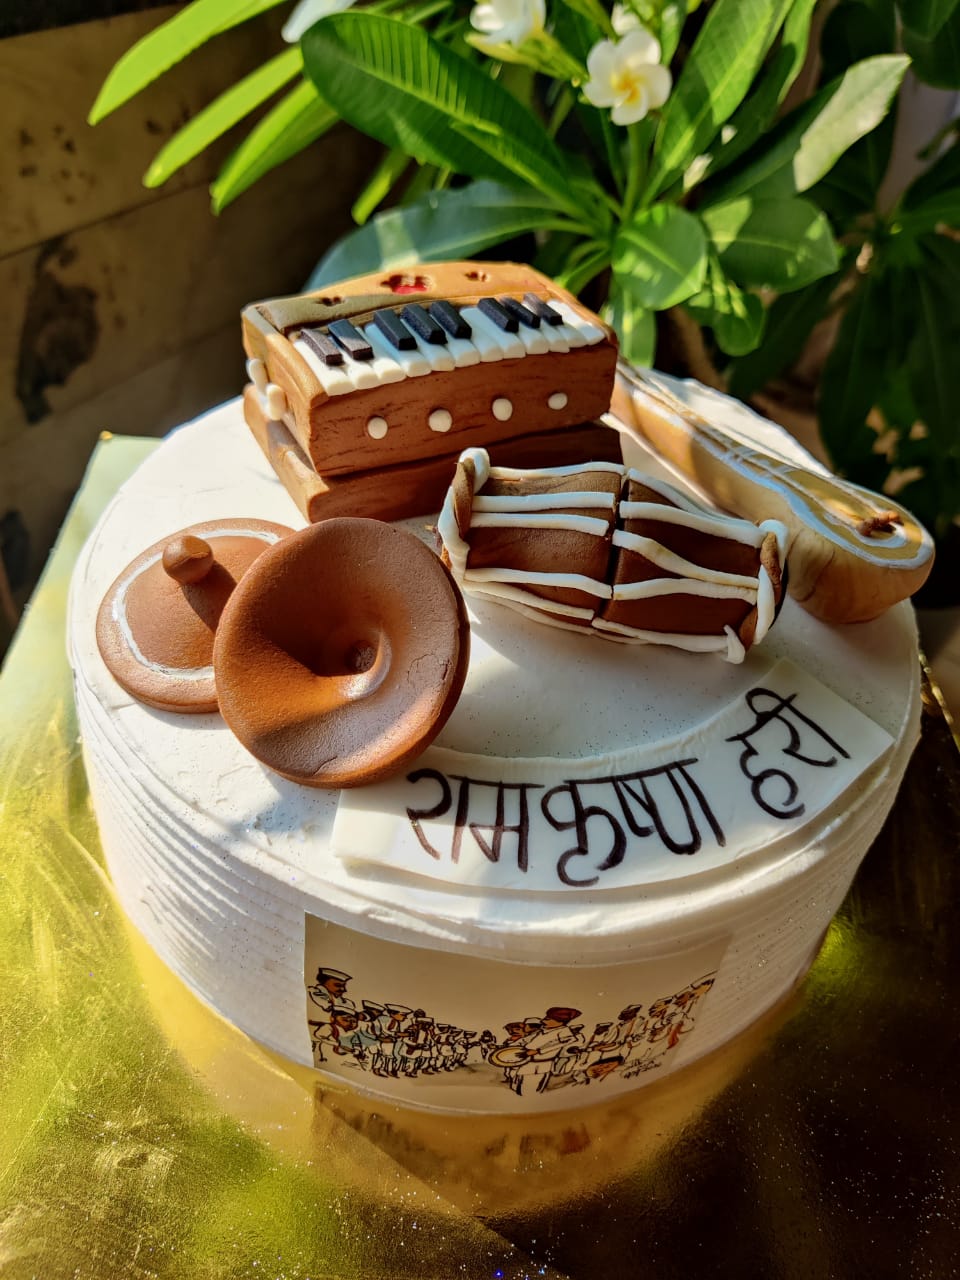 Musical Instruments Theme Cake Designs, Images, Price Near Me